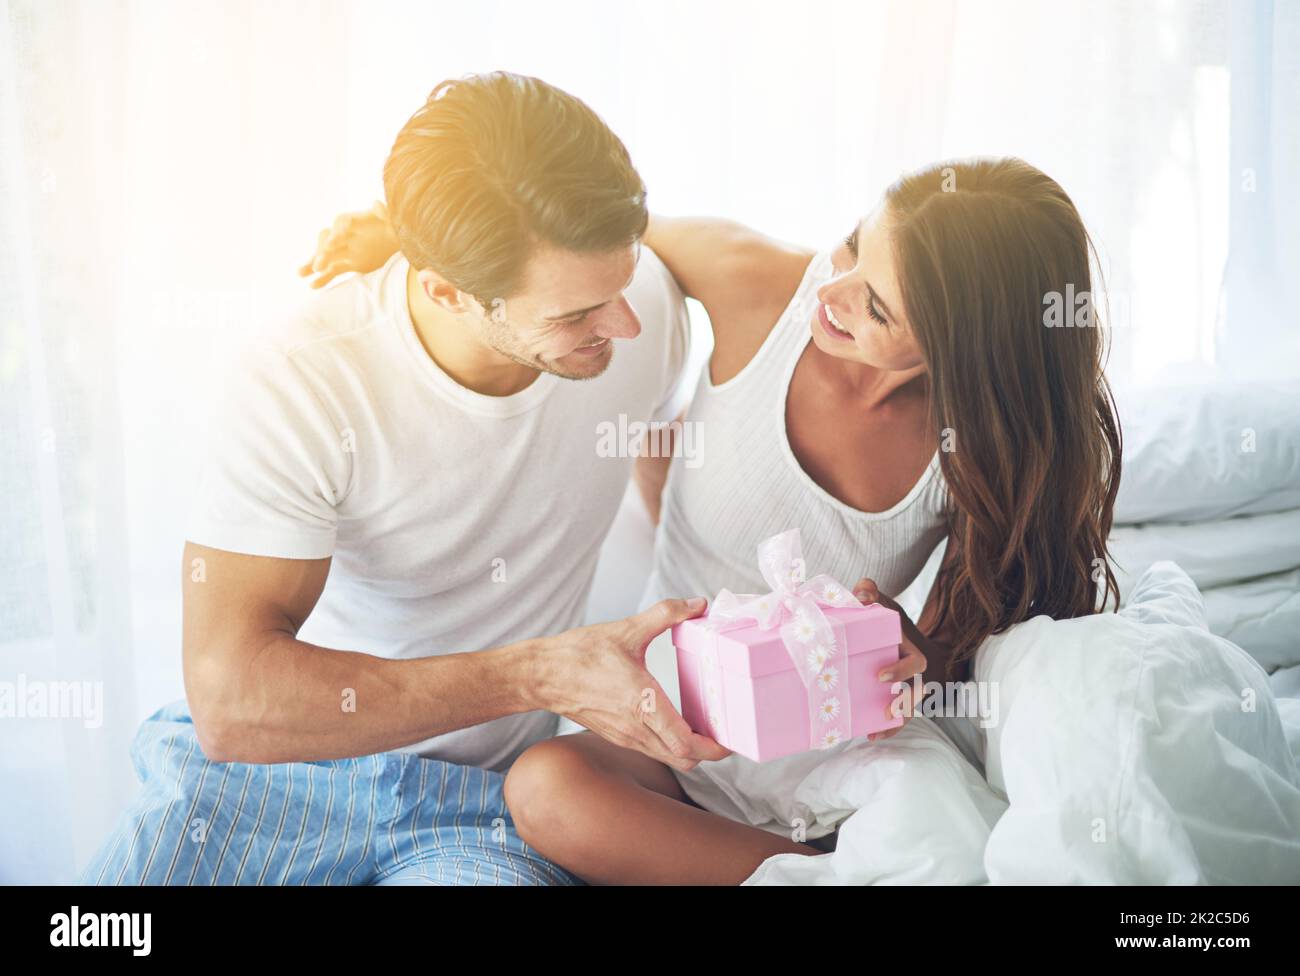 Ive got a little surprise for you. Shot of a loving husband giving his wife a gift. Stock Photo